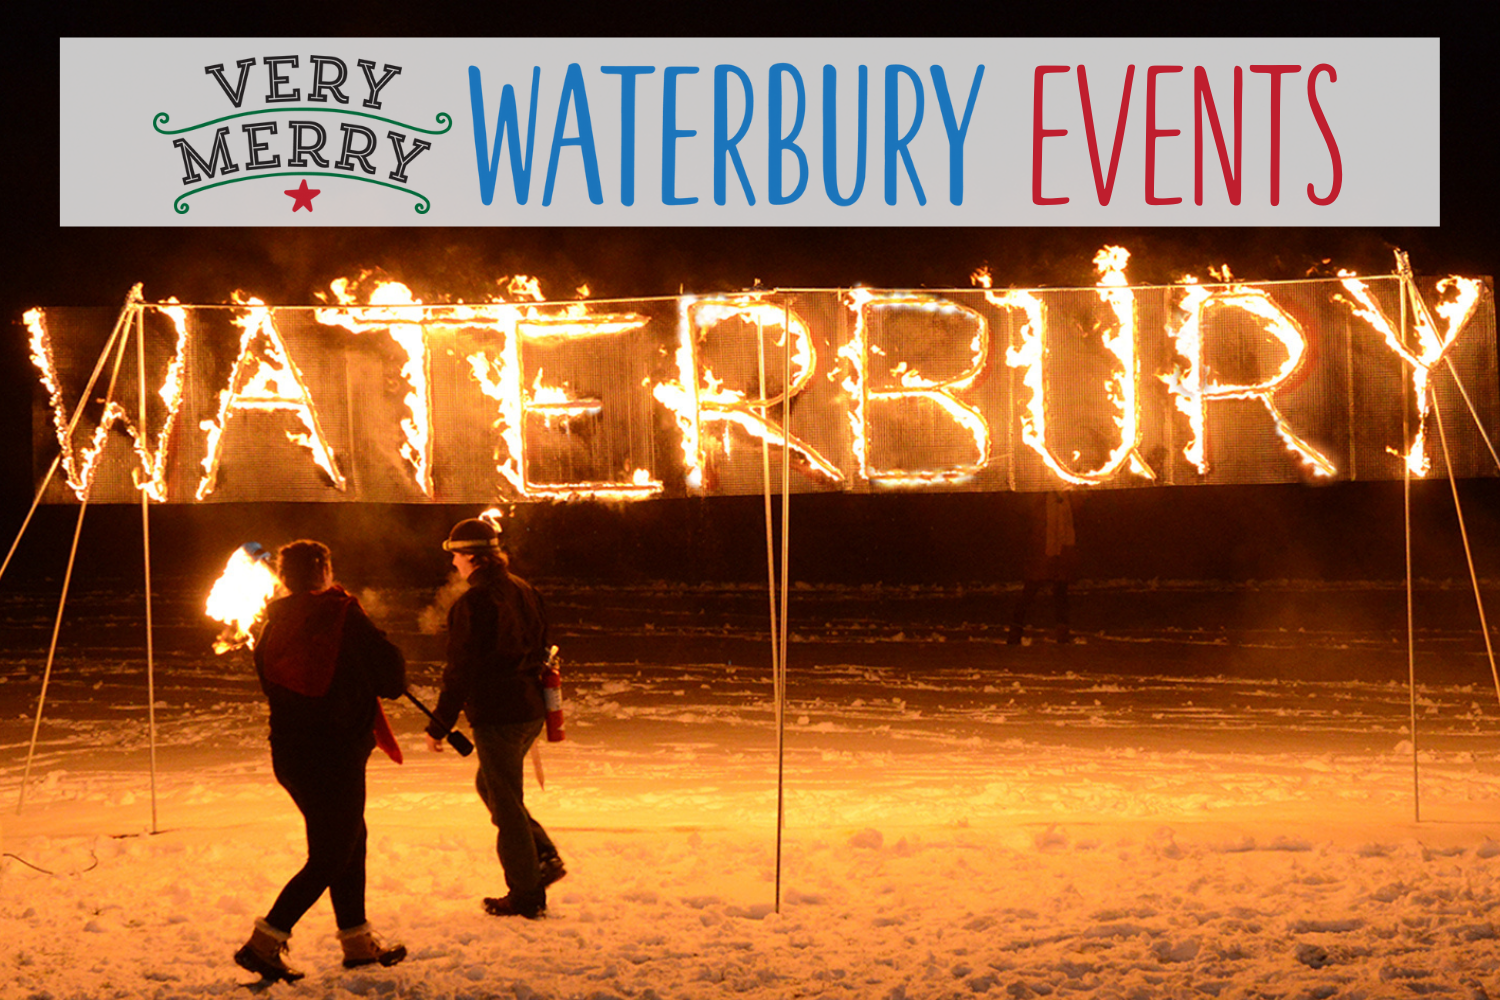 Image of Very Merry Waterbury Holiday Events